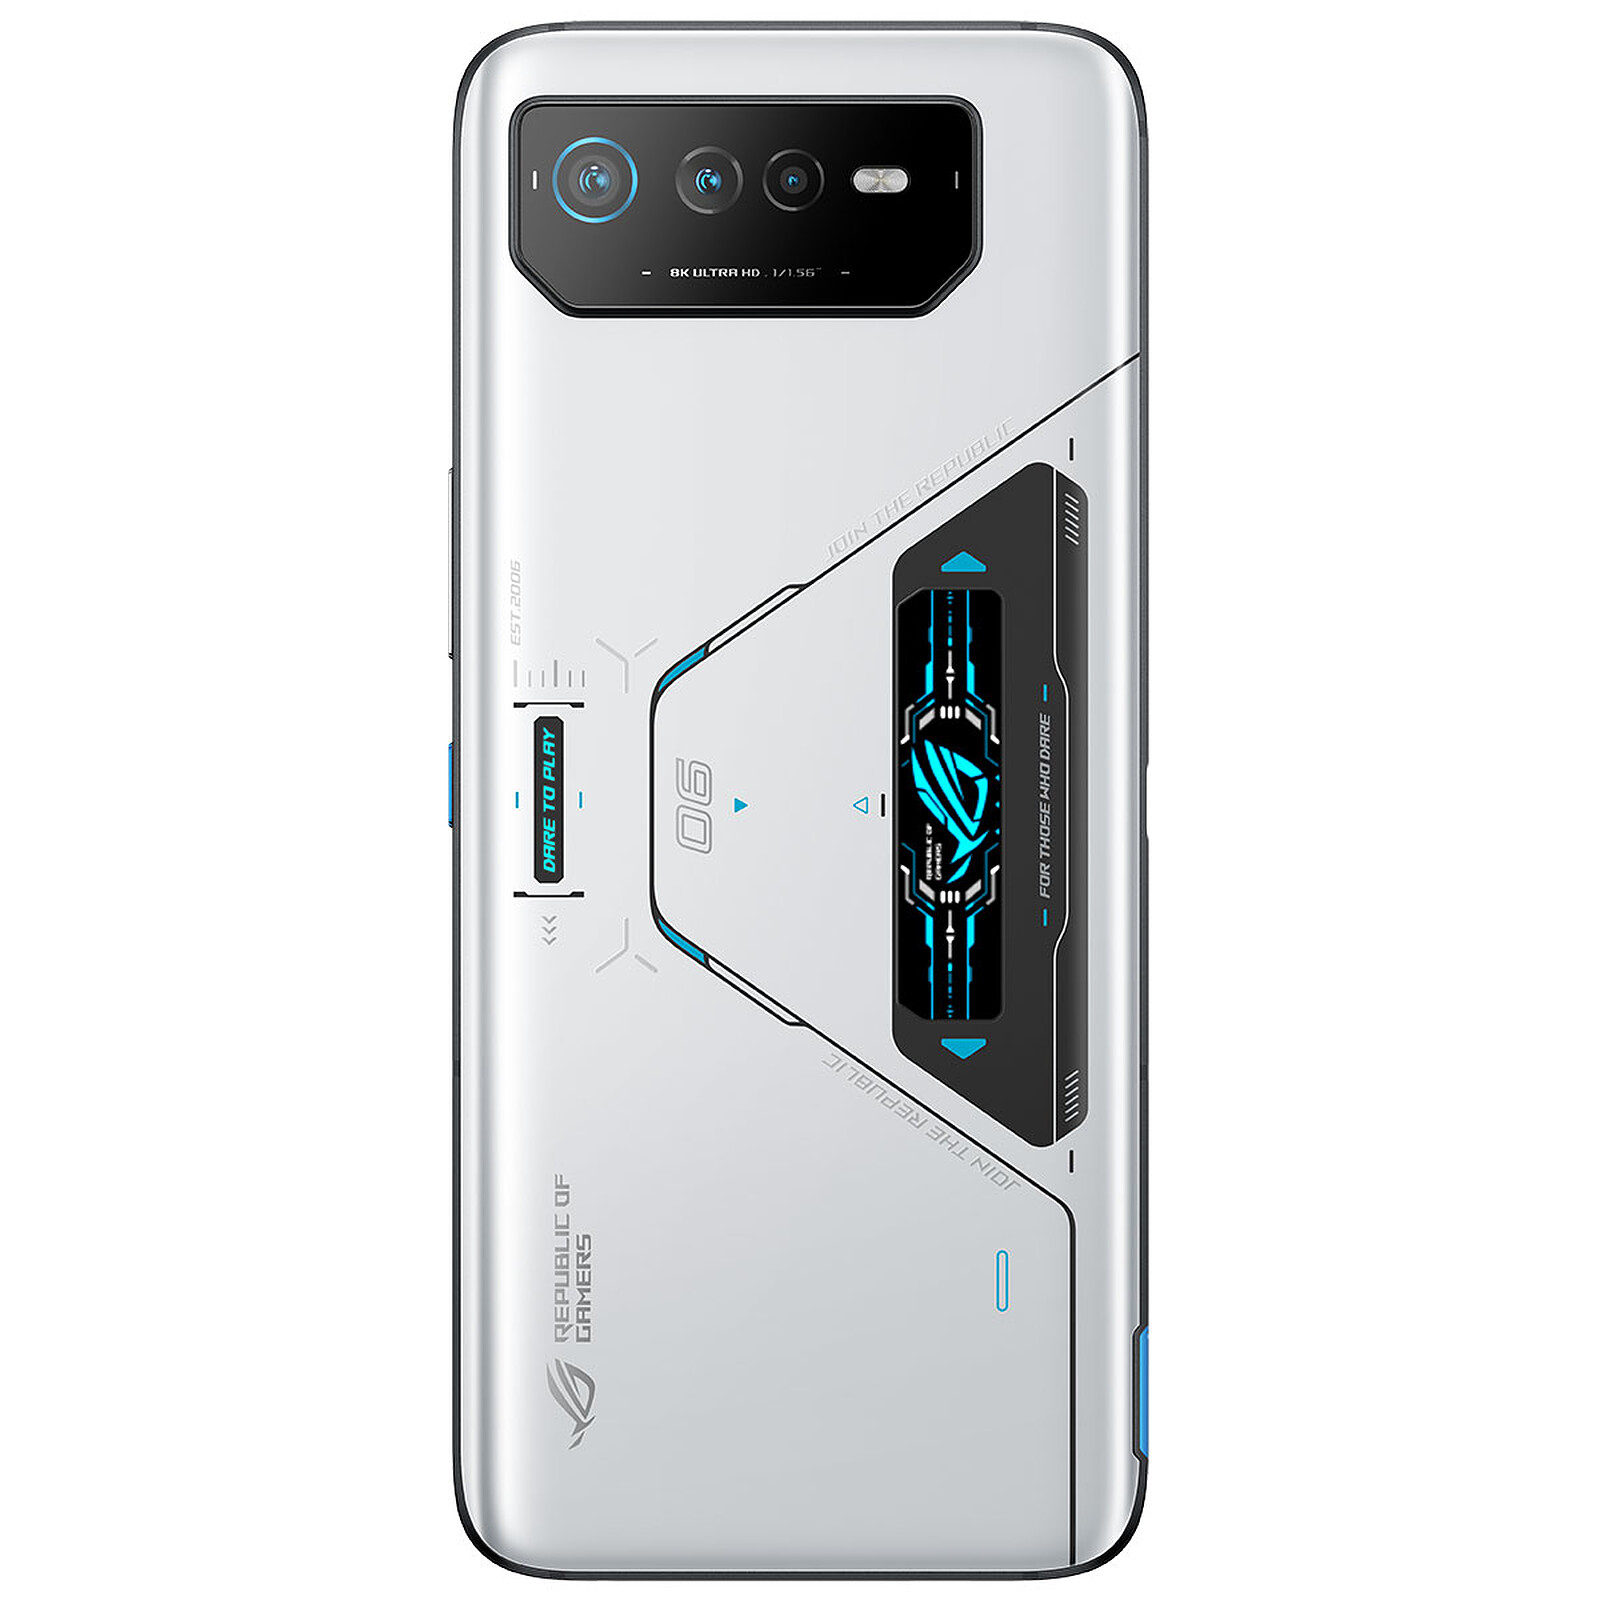 ASUS ROG Phone 6 Pro White (18 GB / 512 GB) - Mobile phone & smartphone ASUS on LDLC